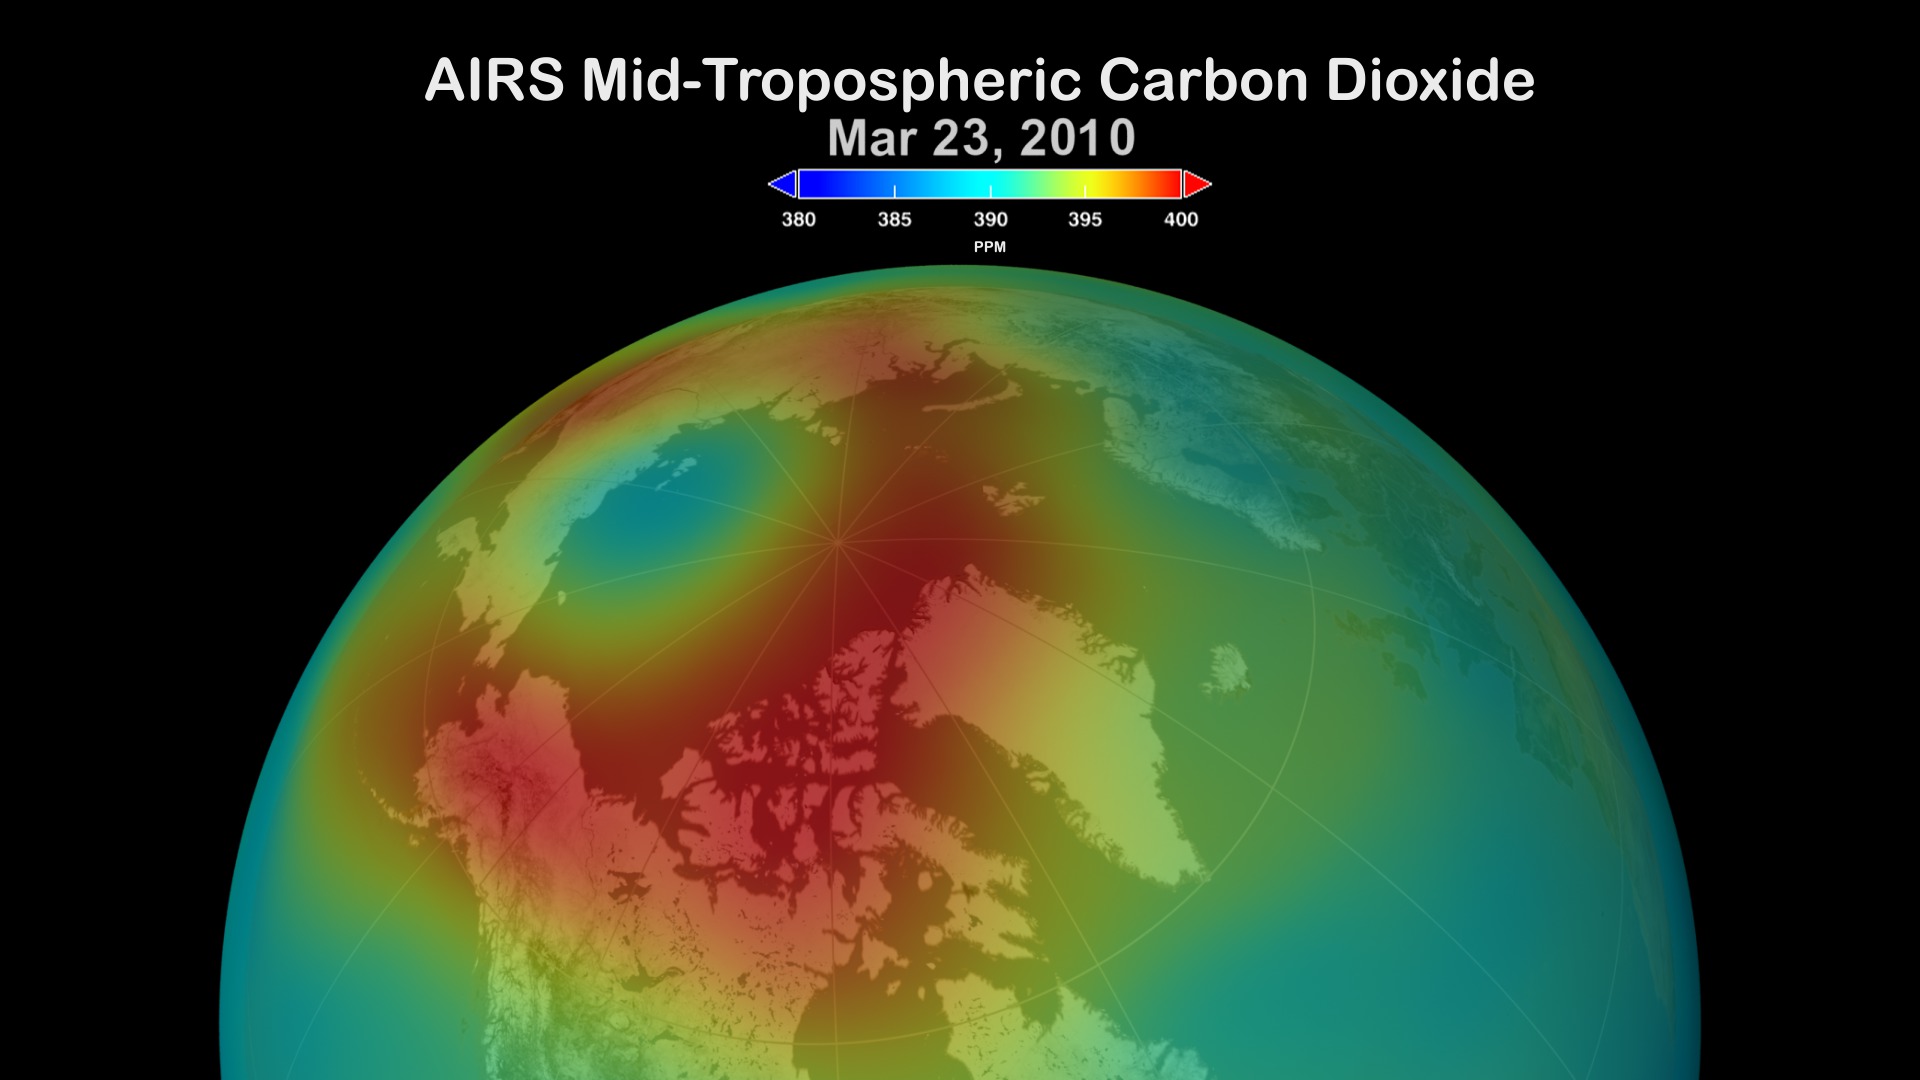 Arctic CO2 in the mid-troposphere (8-12 km altitude) over the period February 2010 through February 2011.  The AIRS data have been combined over a 9-day window and then assimilated by a Fixed Rank Kriging (FRK) process that smoothes the data based upon spatial covariances that are neither stationary nor isotropic.  The FRK methodology was developed by a group in the Program in Spatial Statistics and Environmental Sciences at The Ohio State University.  For More information on this methodology, click here.